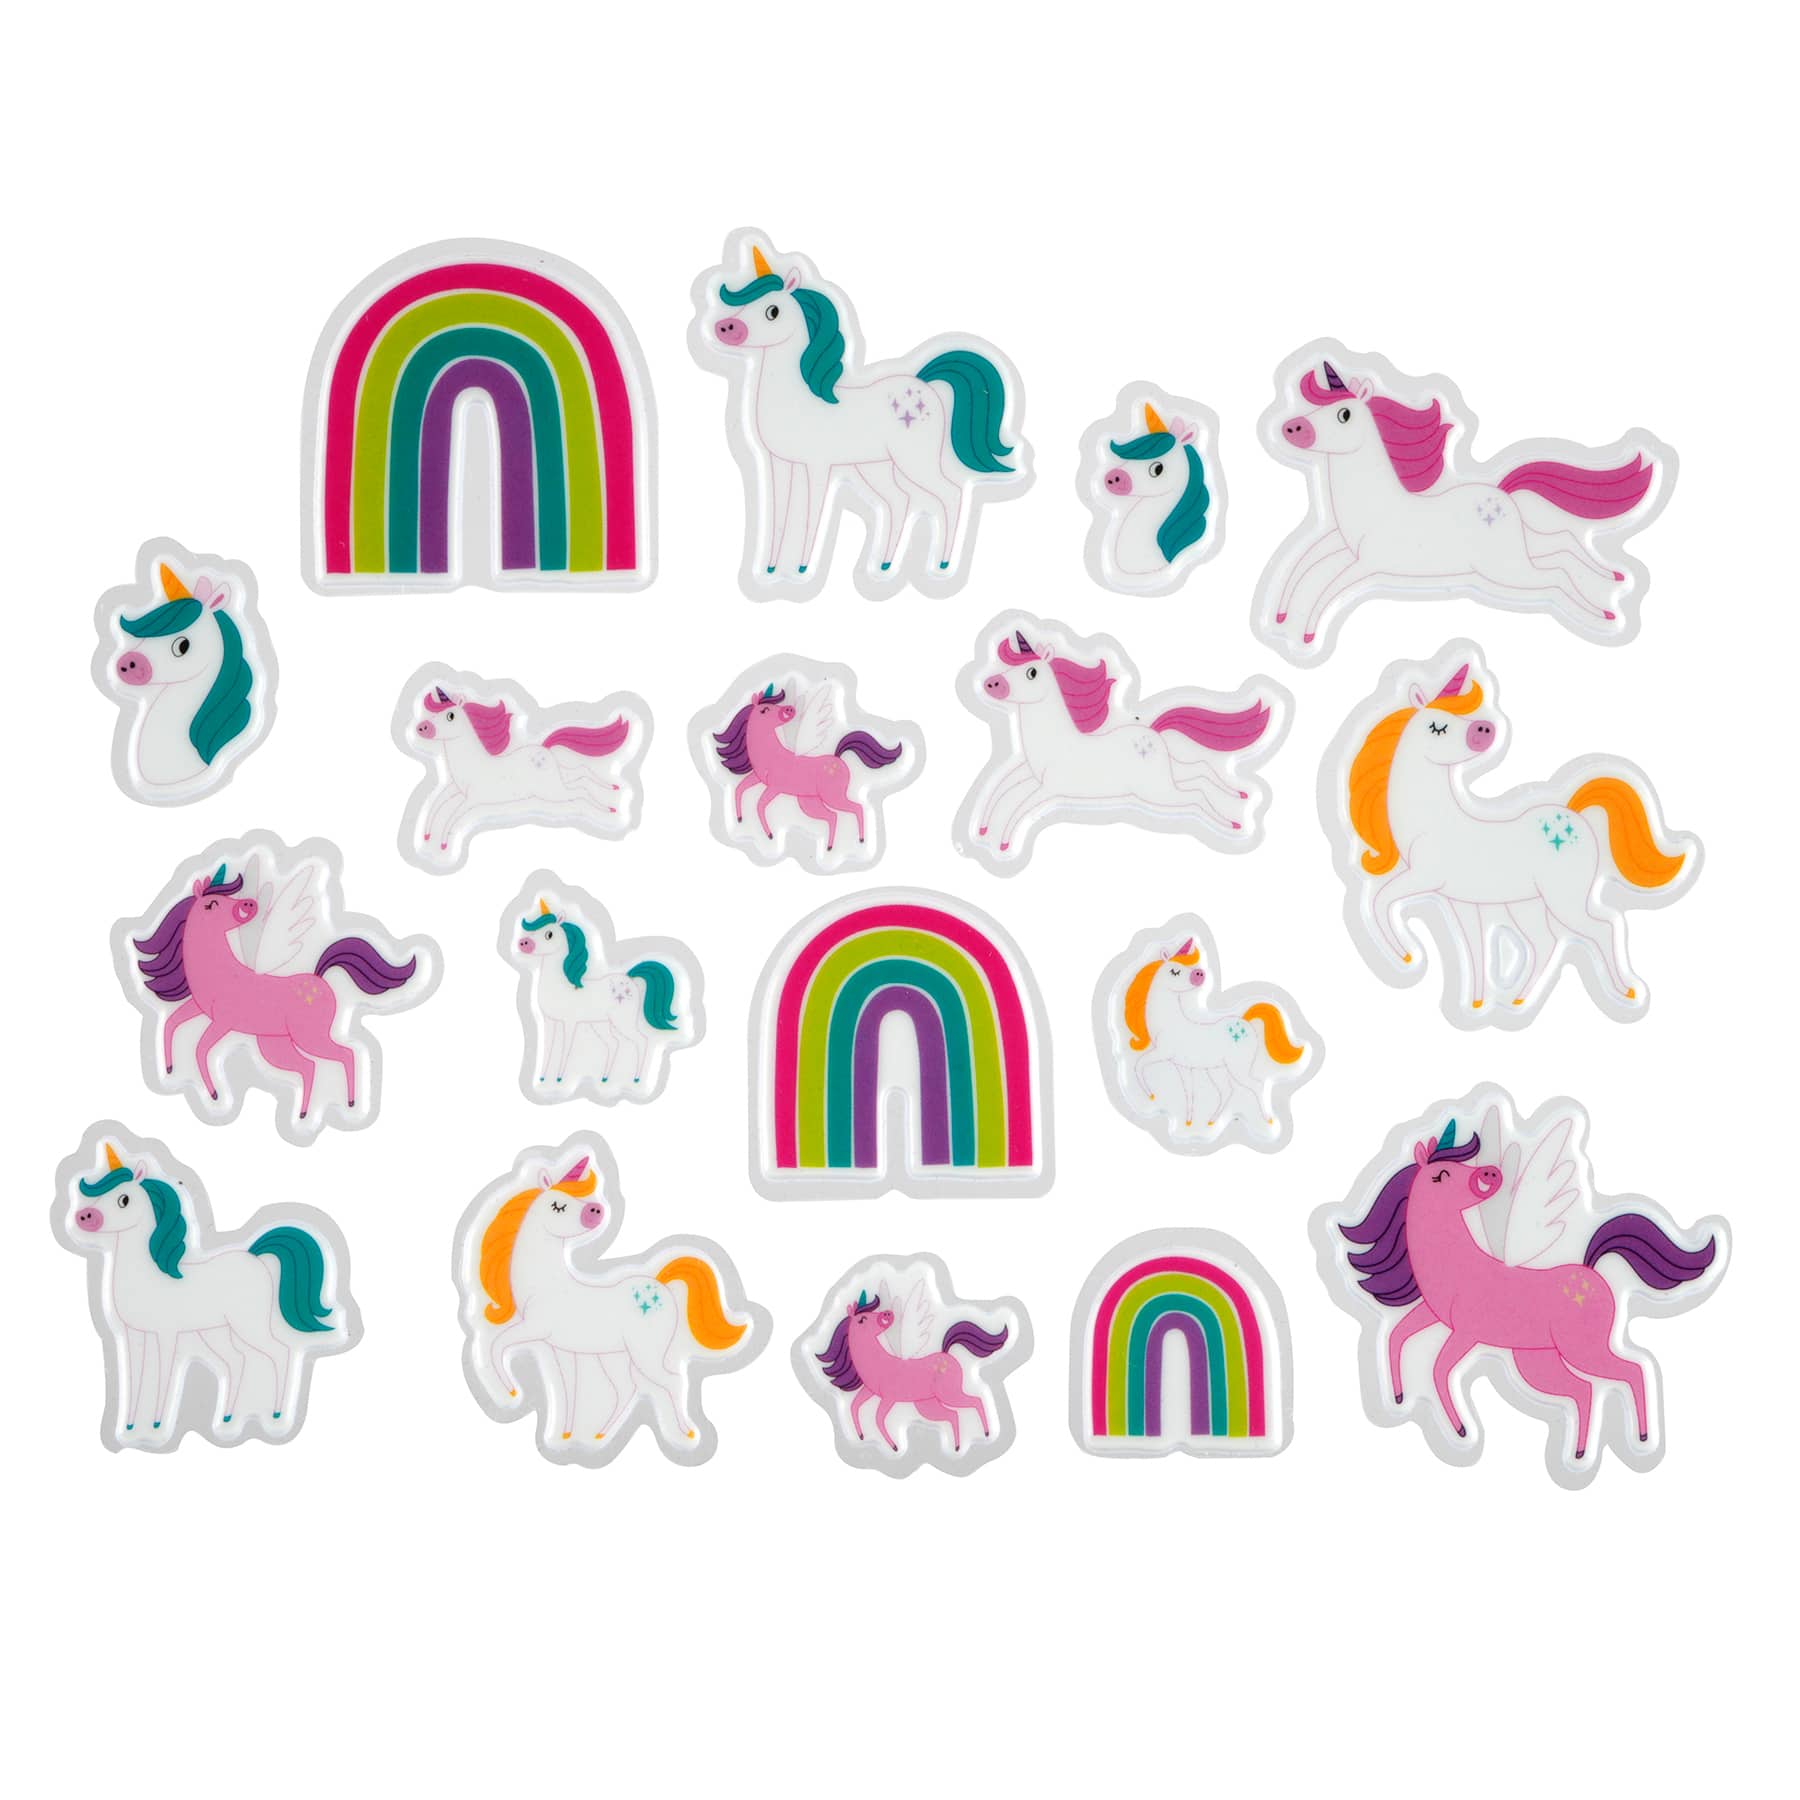 12 Packs: 130 ct. (1,560 total) Glitter Alphabet Foam Stickers by  Creatology™